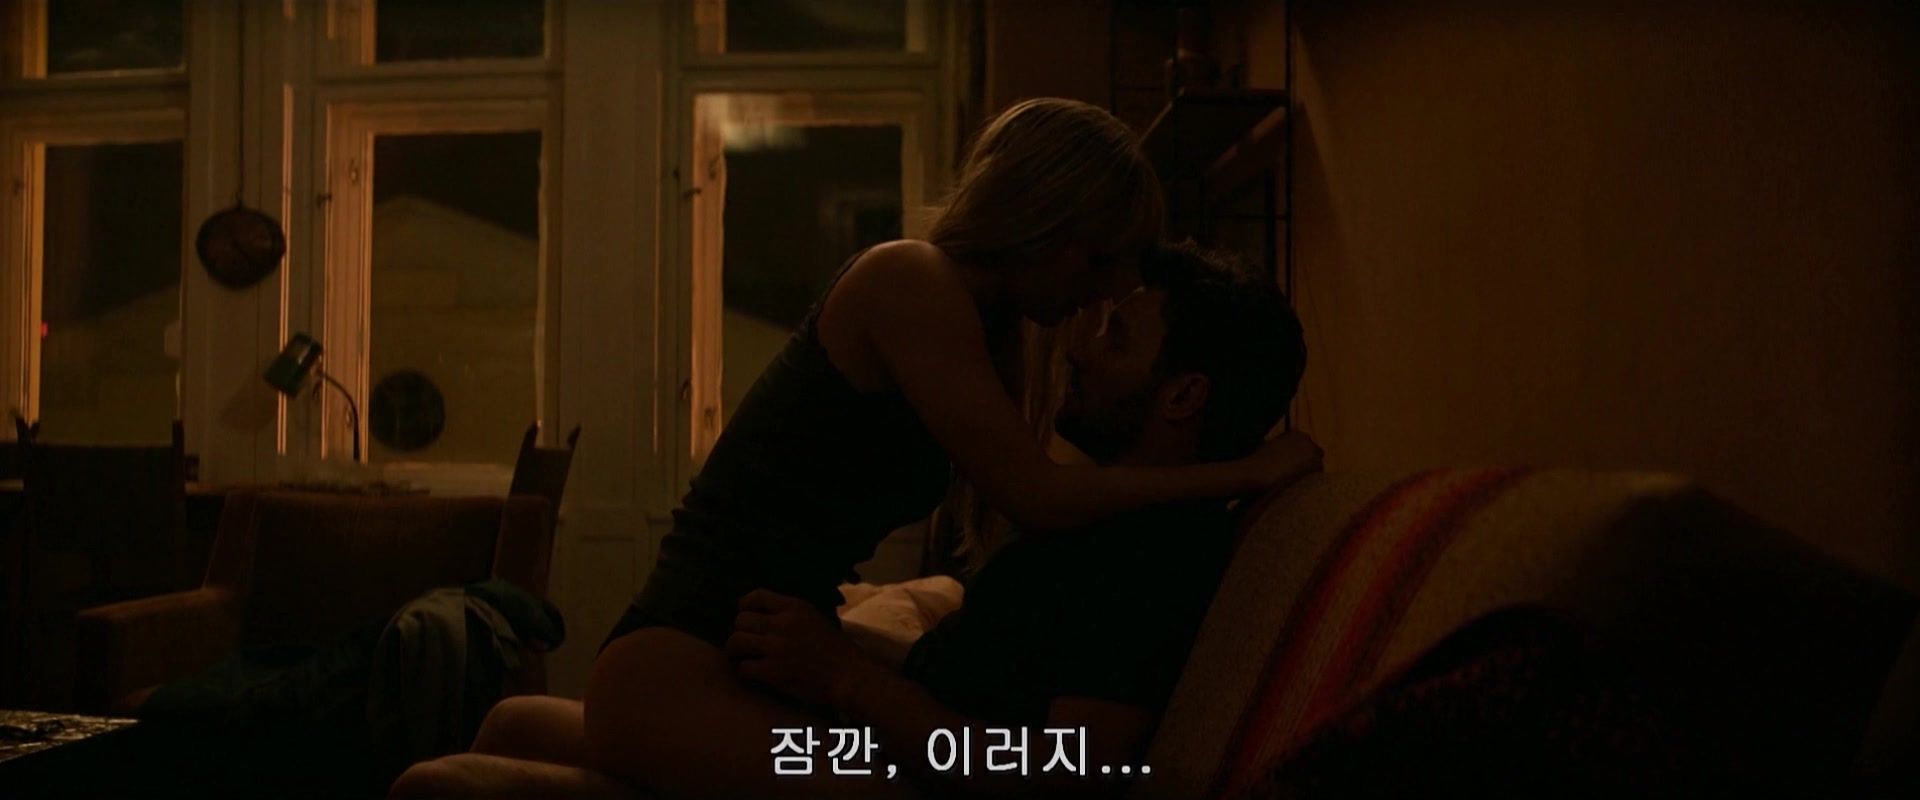 Baile Jennifer Lawrence nude - Red Sparrow (2018) Full HD PornDT